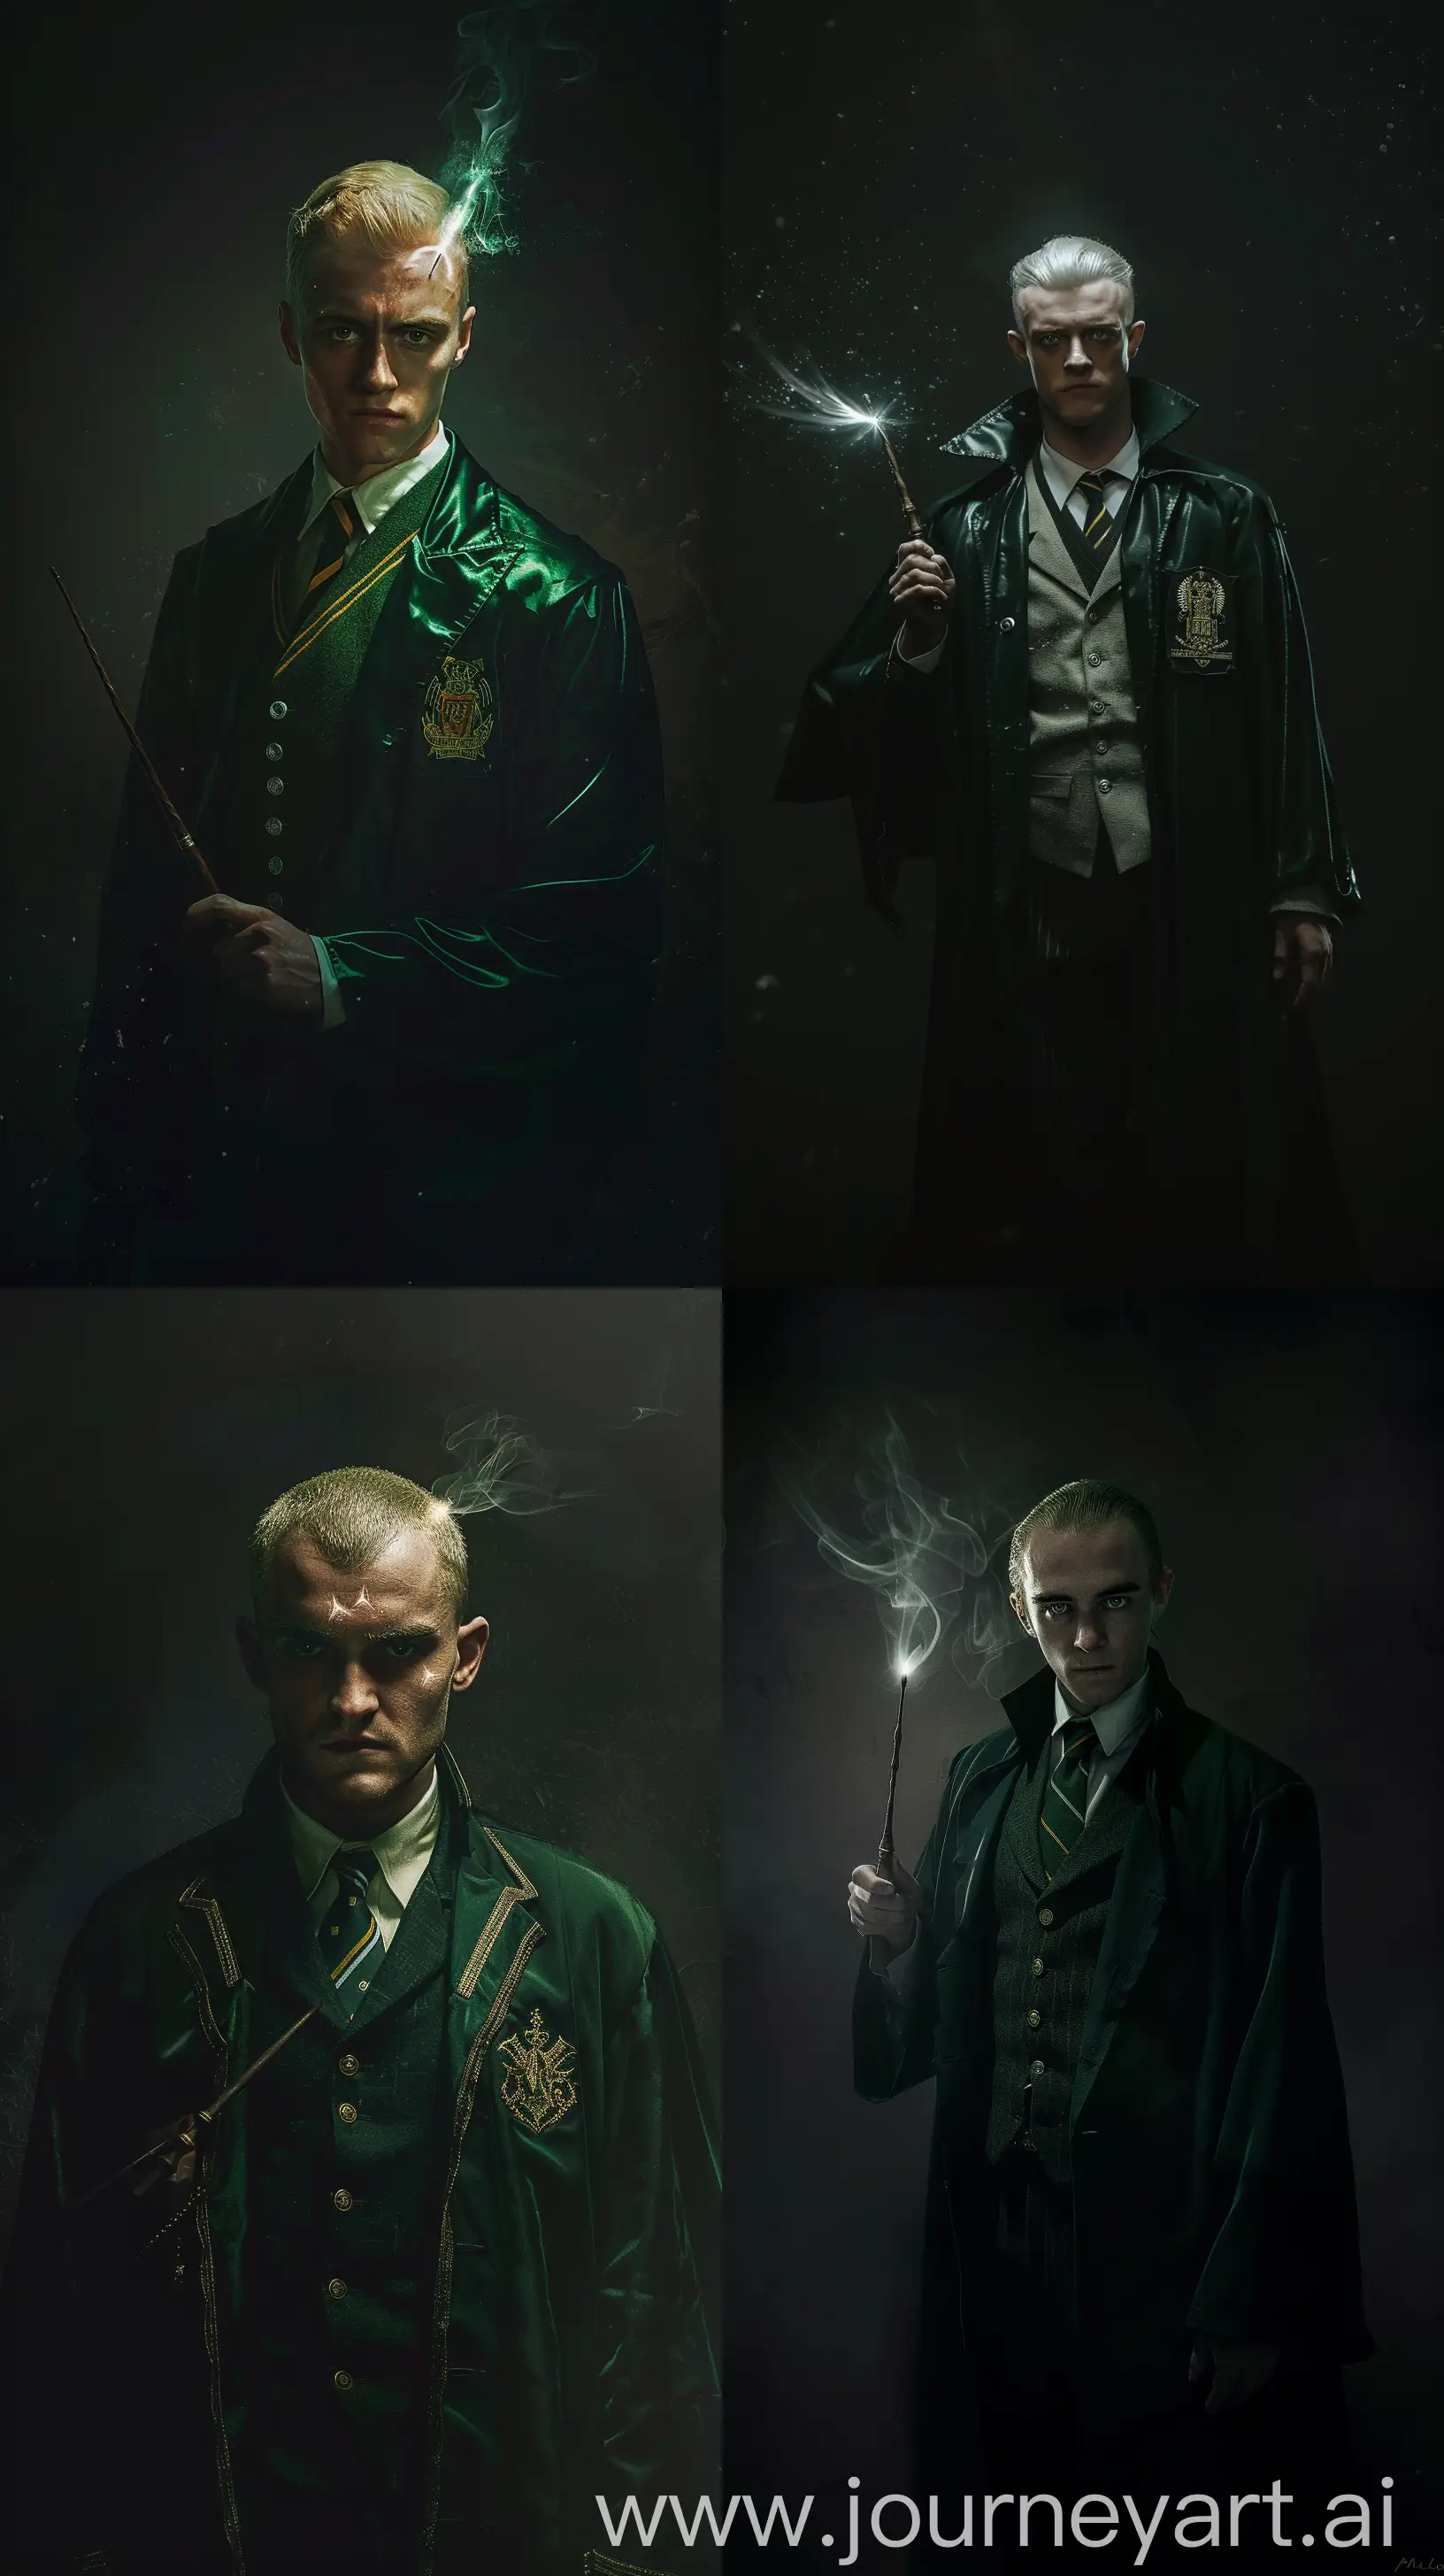 Draco Malfoy (Tom Felton), Slytherin uniform, highlights himself with a wand, there is complete darkness around, waist-high portrait, ultra realistic, --ar 9:16